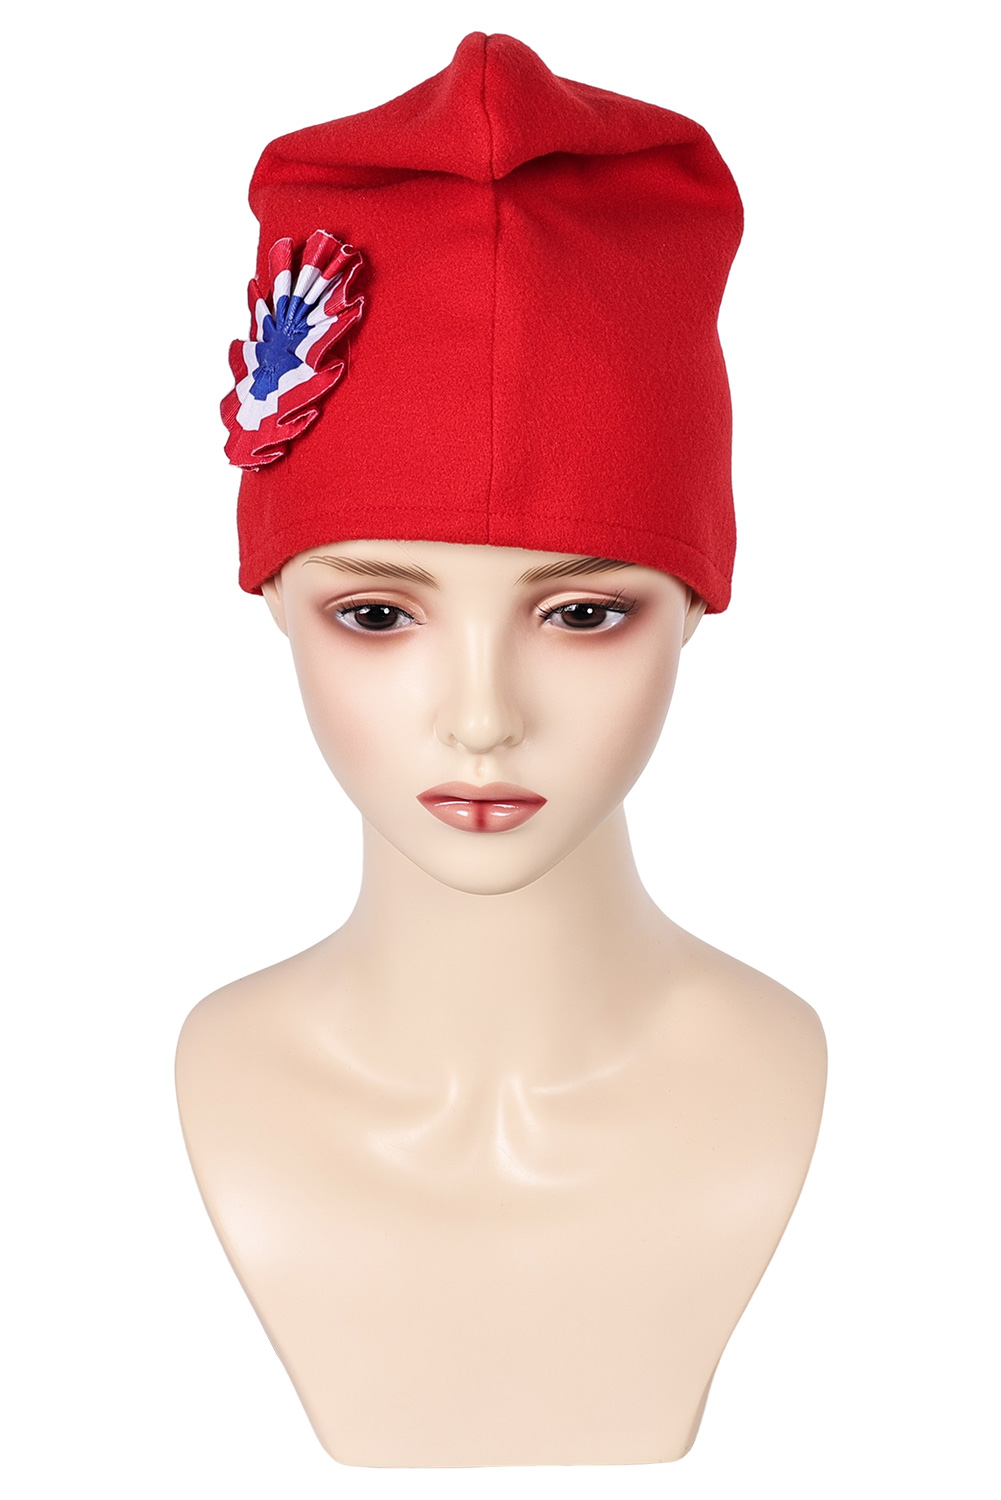 Bonnet Phrygien Olympic Cosplay Red Hat Cap Halloween Costume Accessories